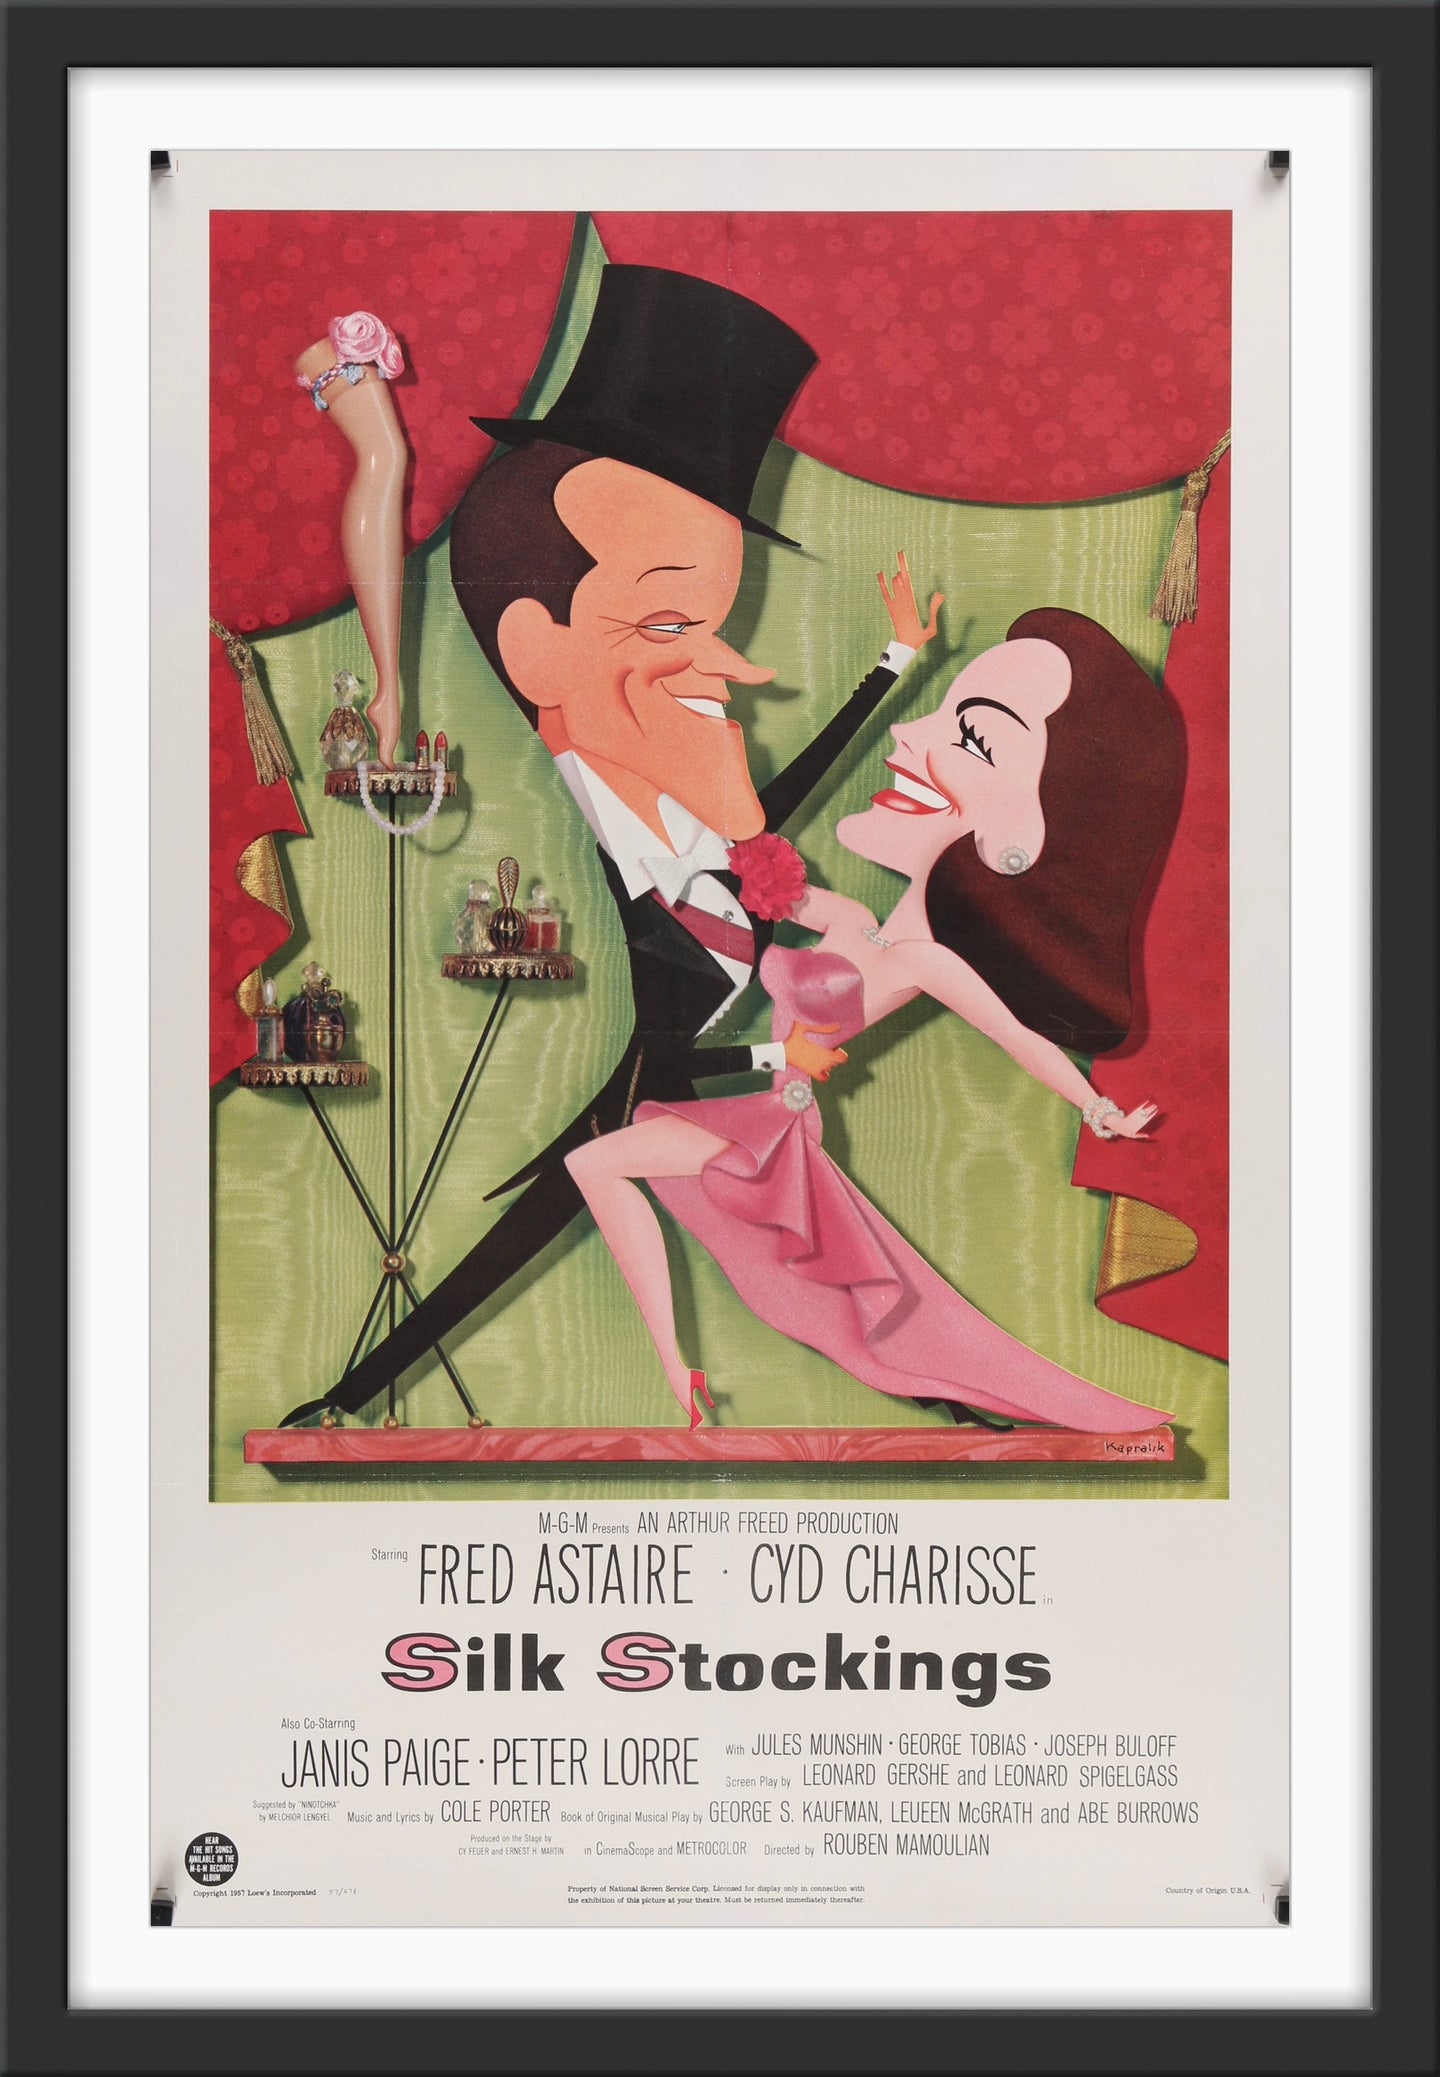 An original movie poster for the Fred Astaire film Silk Stockings